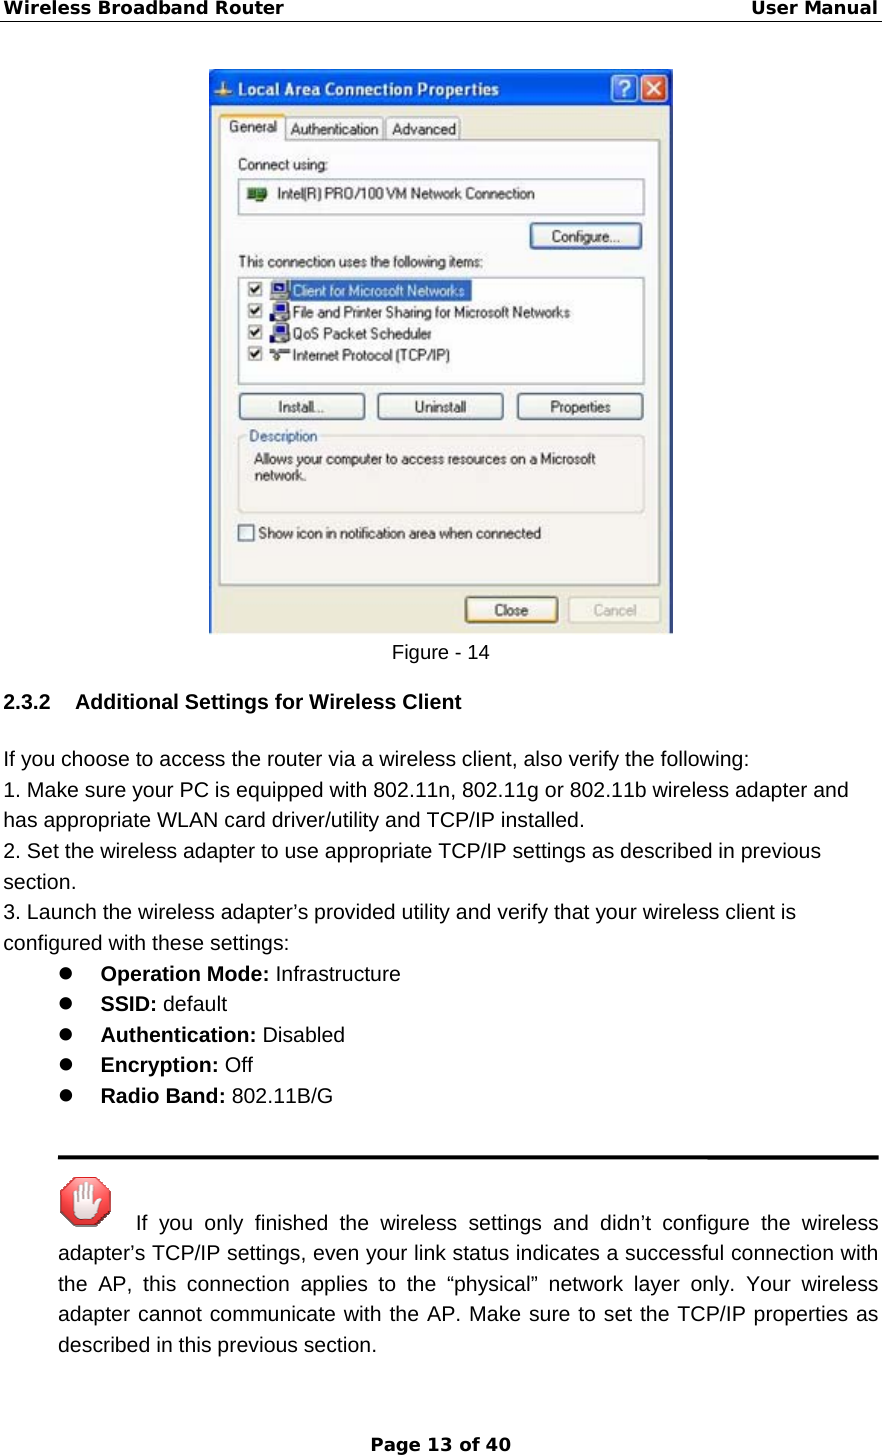 Wireless Broadband Router                                                   User Manual Page 13 of 40  Figure - 14 2.3.2 Additional Settings for Wireless Client If you choose to access the router via a wireless client, also verify the following: 1. Make sure your PC is equipped with 802.11n, 802.11g or 802.11b wireless adapter and has appropriate WLAN card driver/utility and TCP/IP installed. 2. Set the wireless adapter to use appropriate TCP/IP settings as described in previous section. 3. Launch the wireless adapter’s provided utility and verify that your wireless client is configured with these settings: z Operation Mode: Infrastructure z SSID: default z Authentication: Disabled z Encryption: Off z Radio Band: 802.11B/G     If you only finished the wireless settings and didn’t configure the wireless adapter’s TCP/IP settings, even your link status indicates a successful connection with the AP, this connection applies to the “physical” network layer only. Your wireless adapter cannot communicate with the AP. Make sure to set the TCP/IP properties as described in this previous section. 